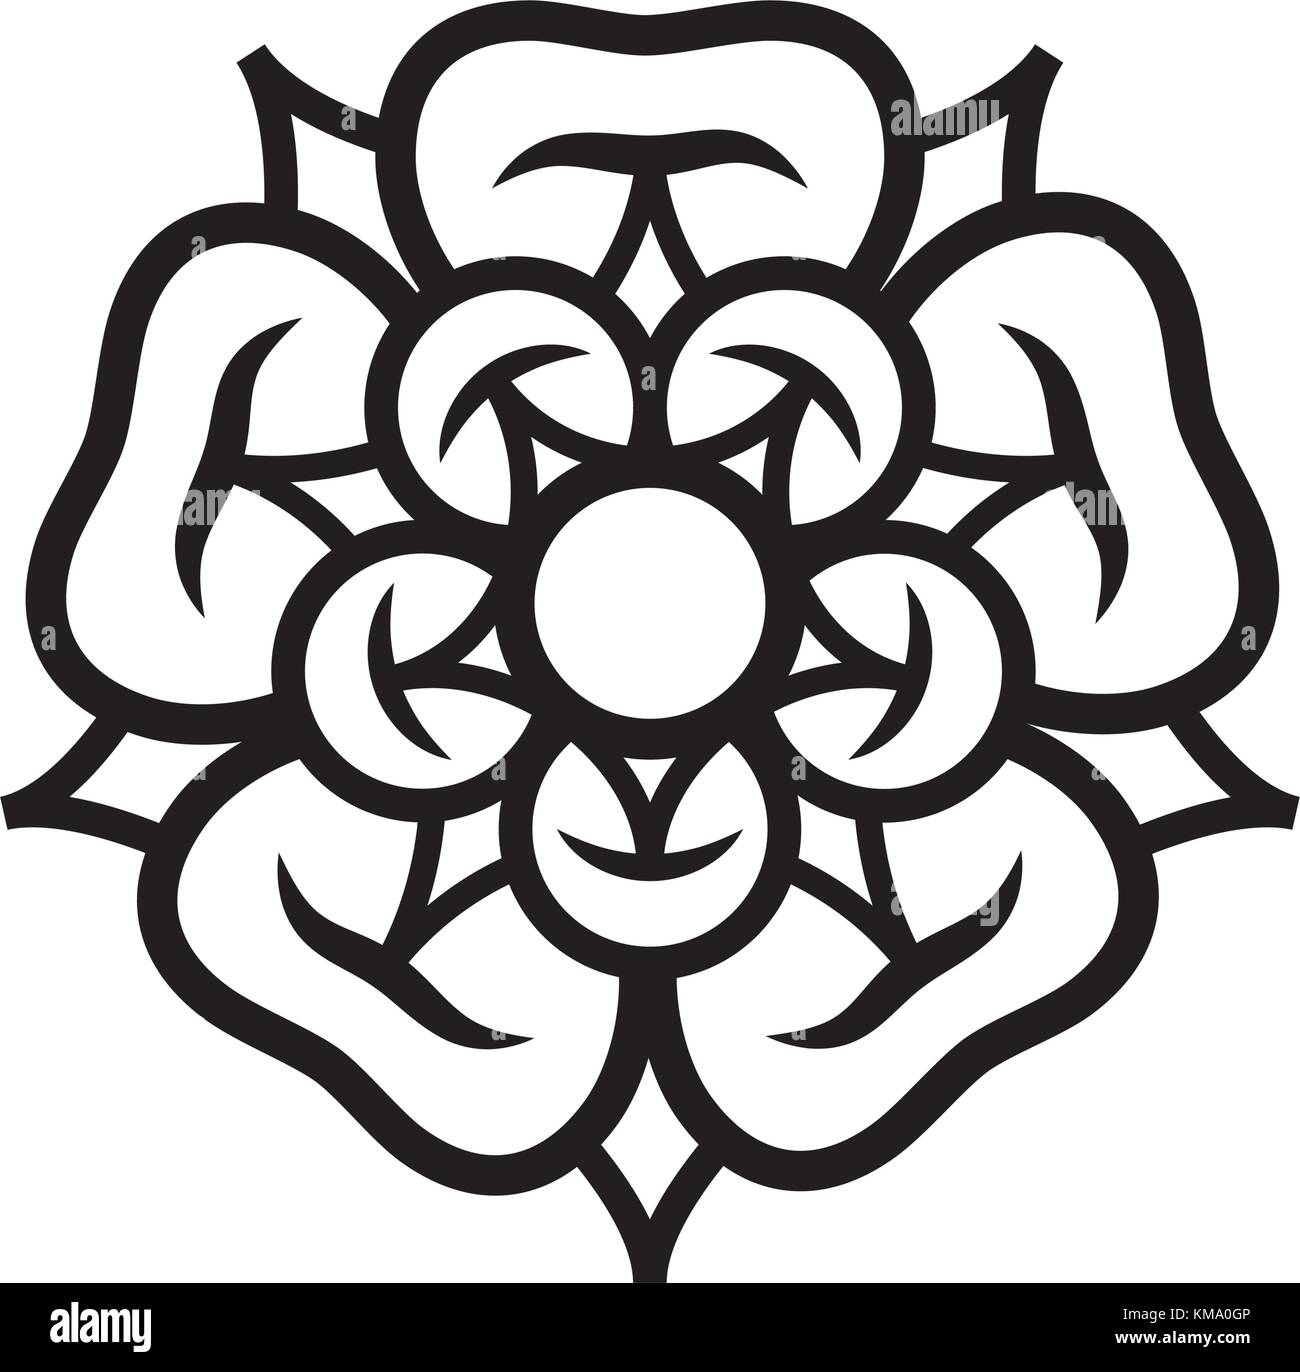 Rose (Queen of flowers). Flower from The Garden of Eden; Paradise flower. The symbol of love and passion, beauty and perfection; also heraldic emblem. Stock Vector